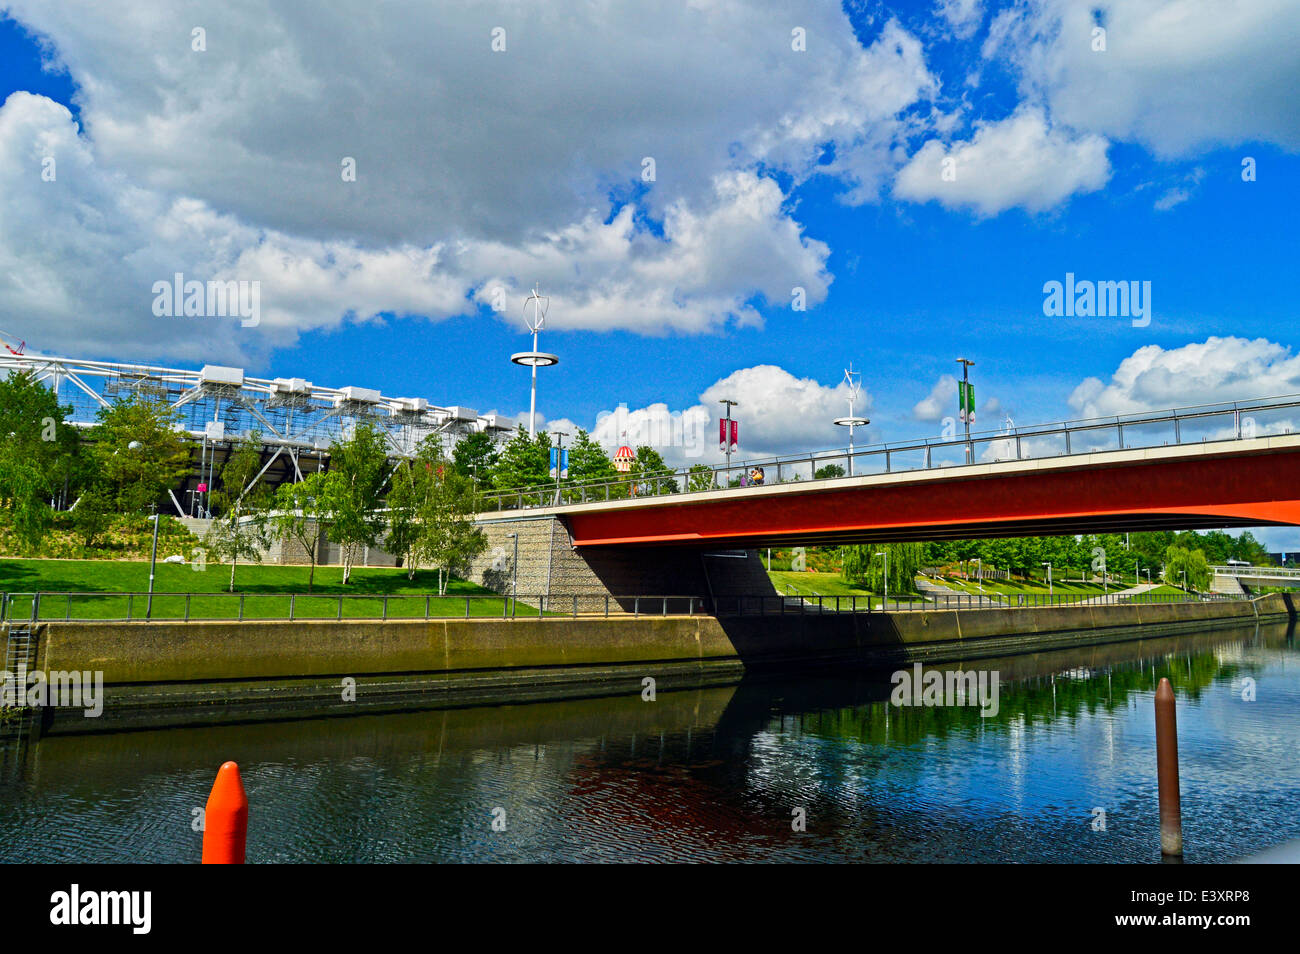 The Olympic Stadium at the Queen Elizabeth Olympic Park, Stratford, London, England, United Kingdom Stock Photo